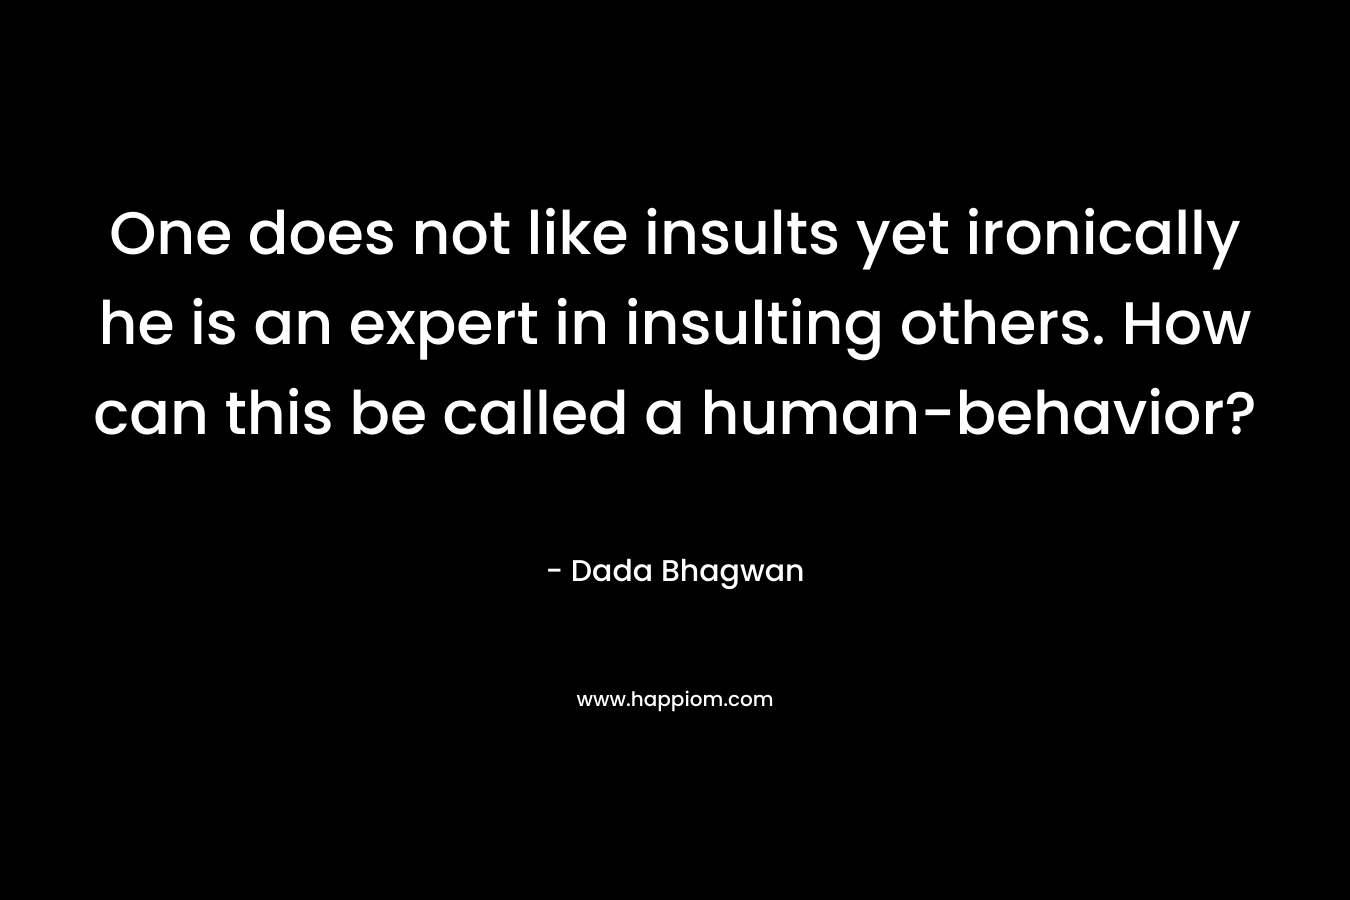 One does not like insults yet ironically he is an expert in insulting others. How can this be called a human-behavior? – Dada Bhagwan